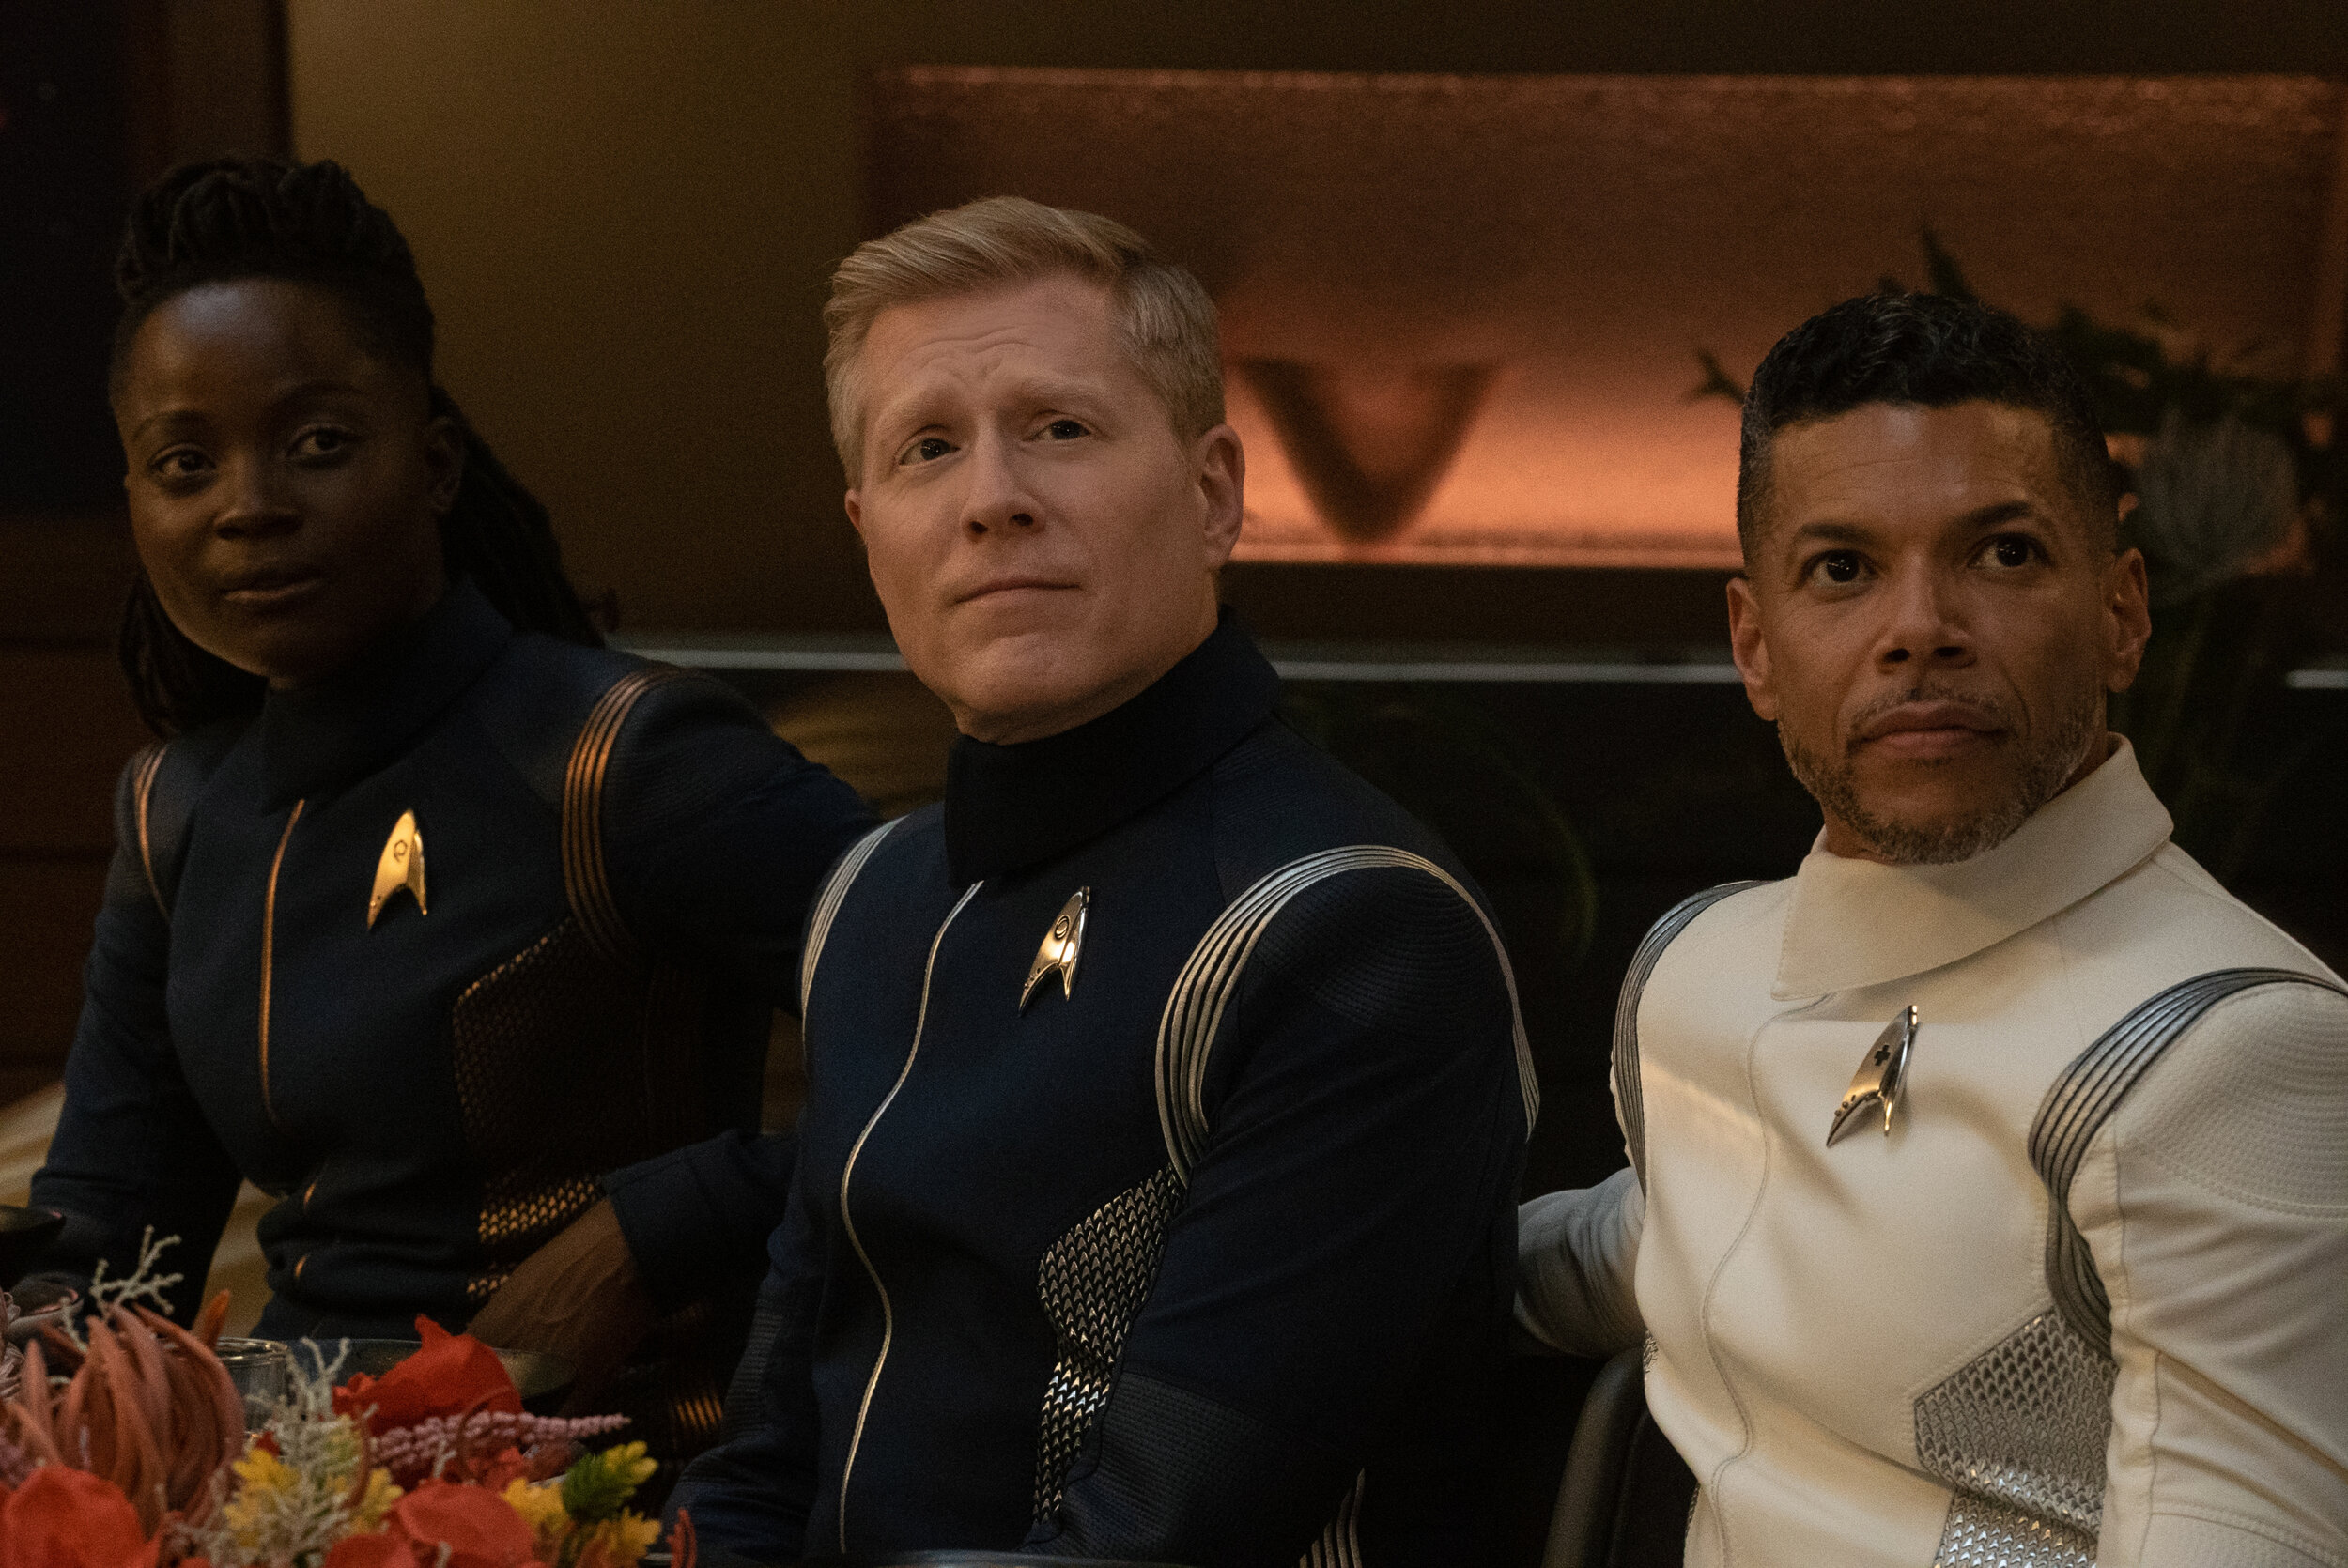   "Forget Me Not" -- Ep#304 -- Pictured: Oyin Oladejo as Lt. Joann Owosekun, Anthony Rapp as Paul Stamets and Wilson Cruz as Dr. Hugh Culber of the CBS All Access series STAR TREK: DISCOVERY. Photo Cr: Michael Gibson/CBS ©2020 CBS Interactive, Inc. A